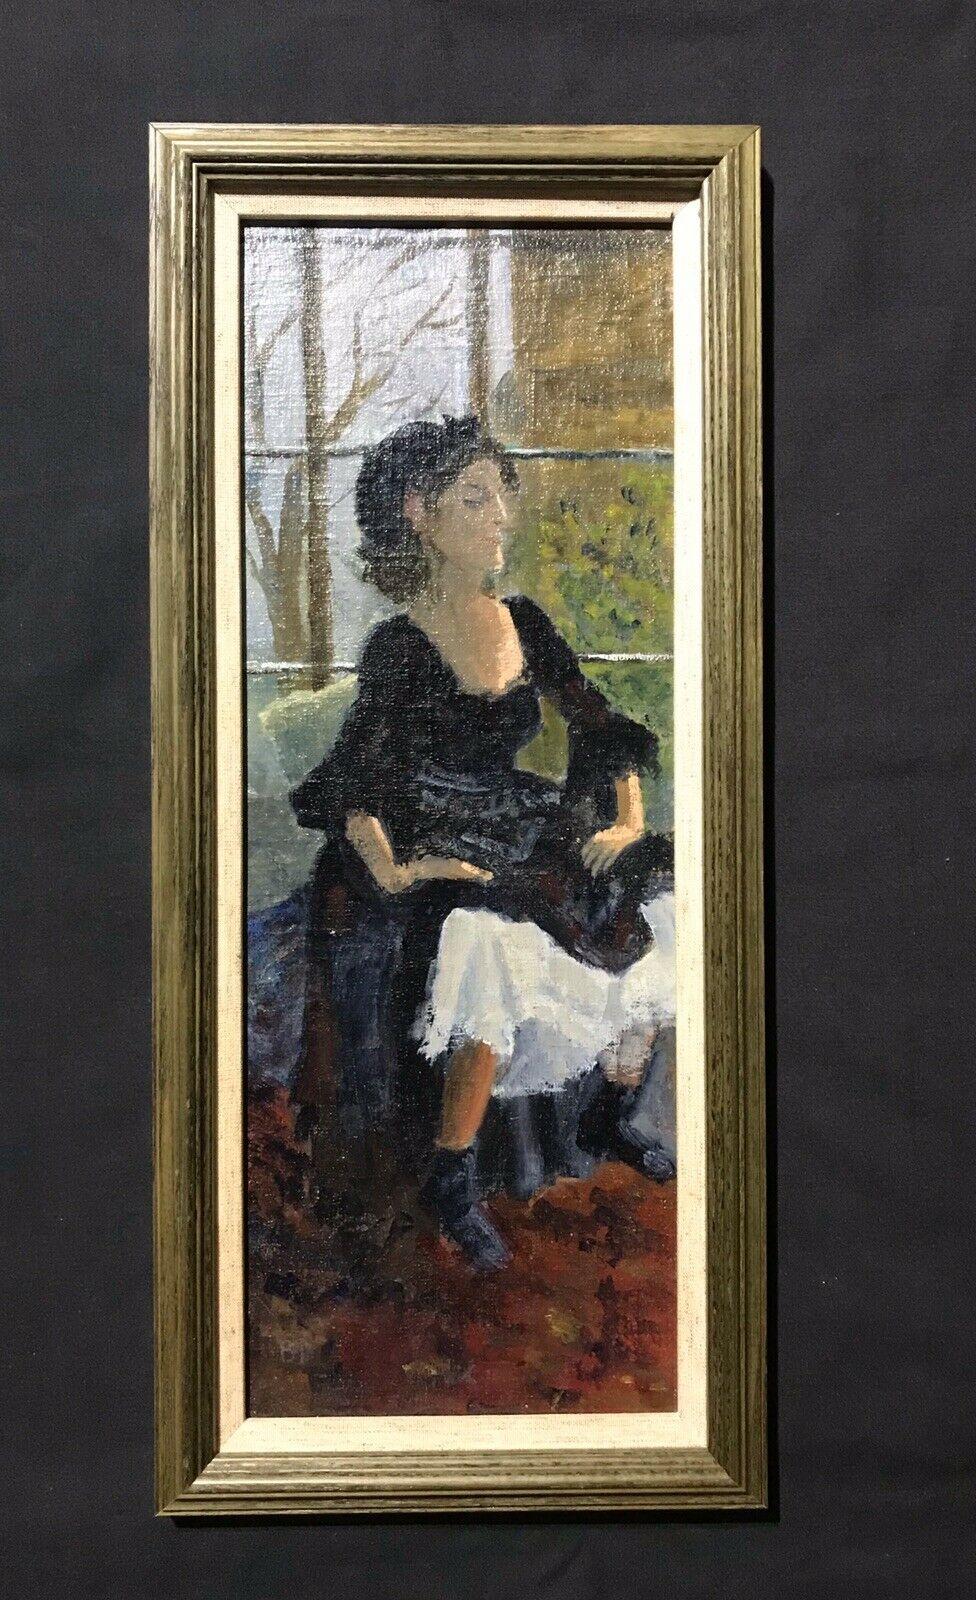 ENGLISH IMPRESSIONIST OIL - LADY IN OLD FASHIONED DRESS SEATED IN WINDOW SILL - Painting by Unknown